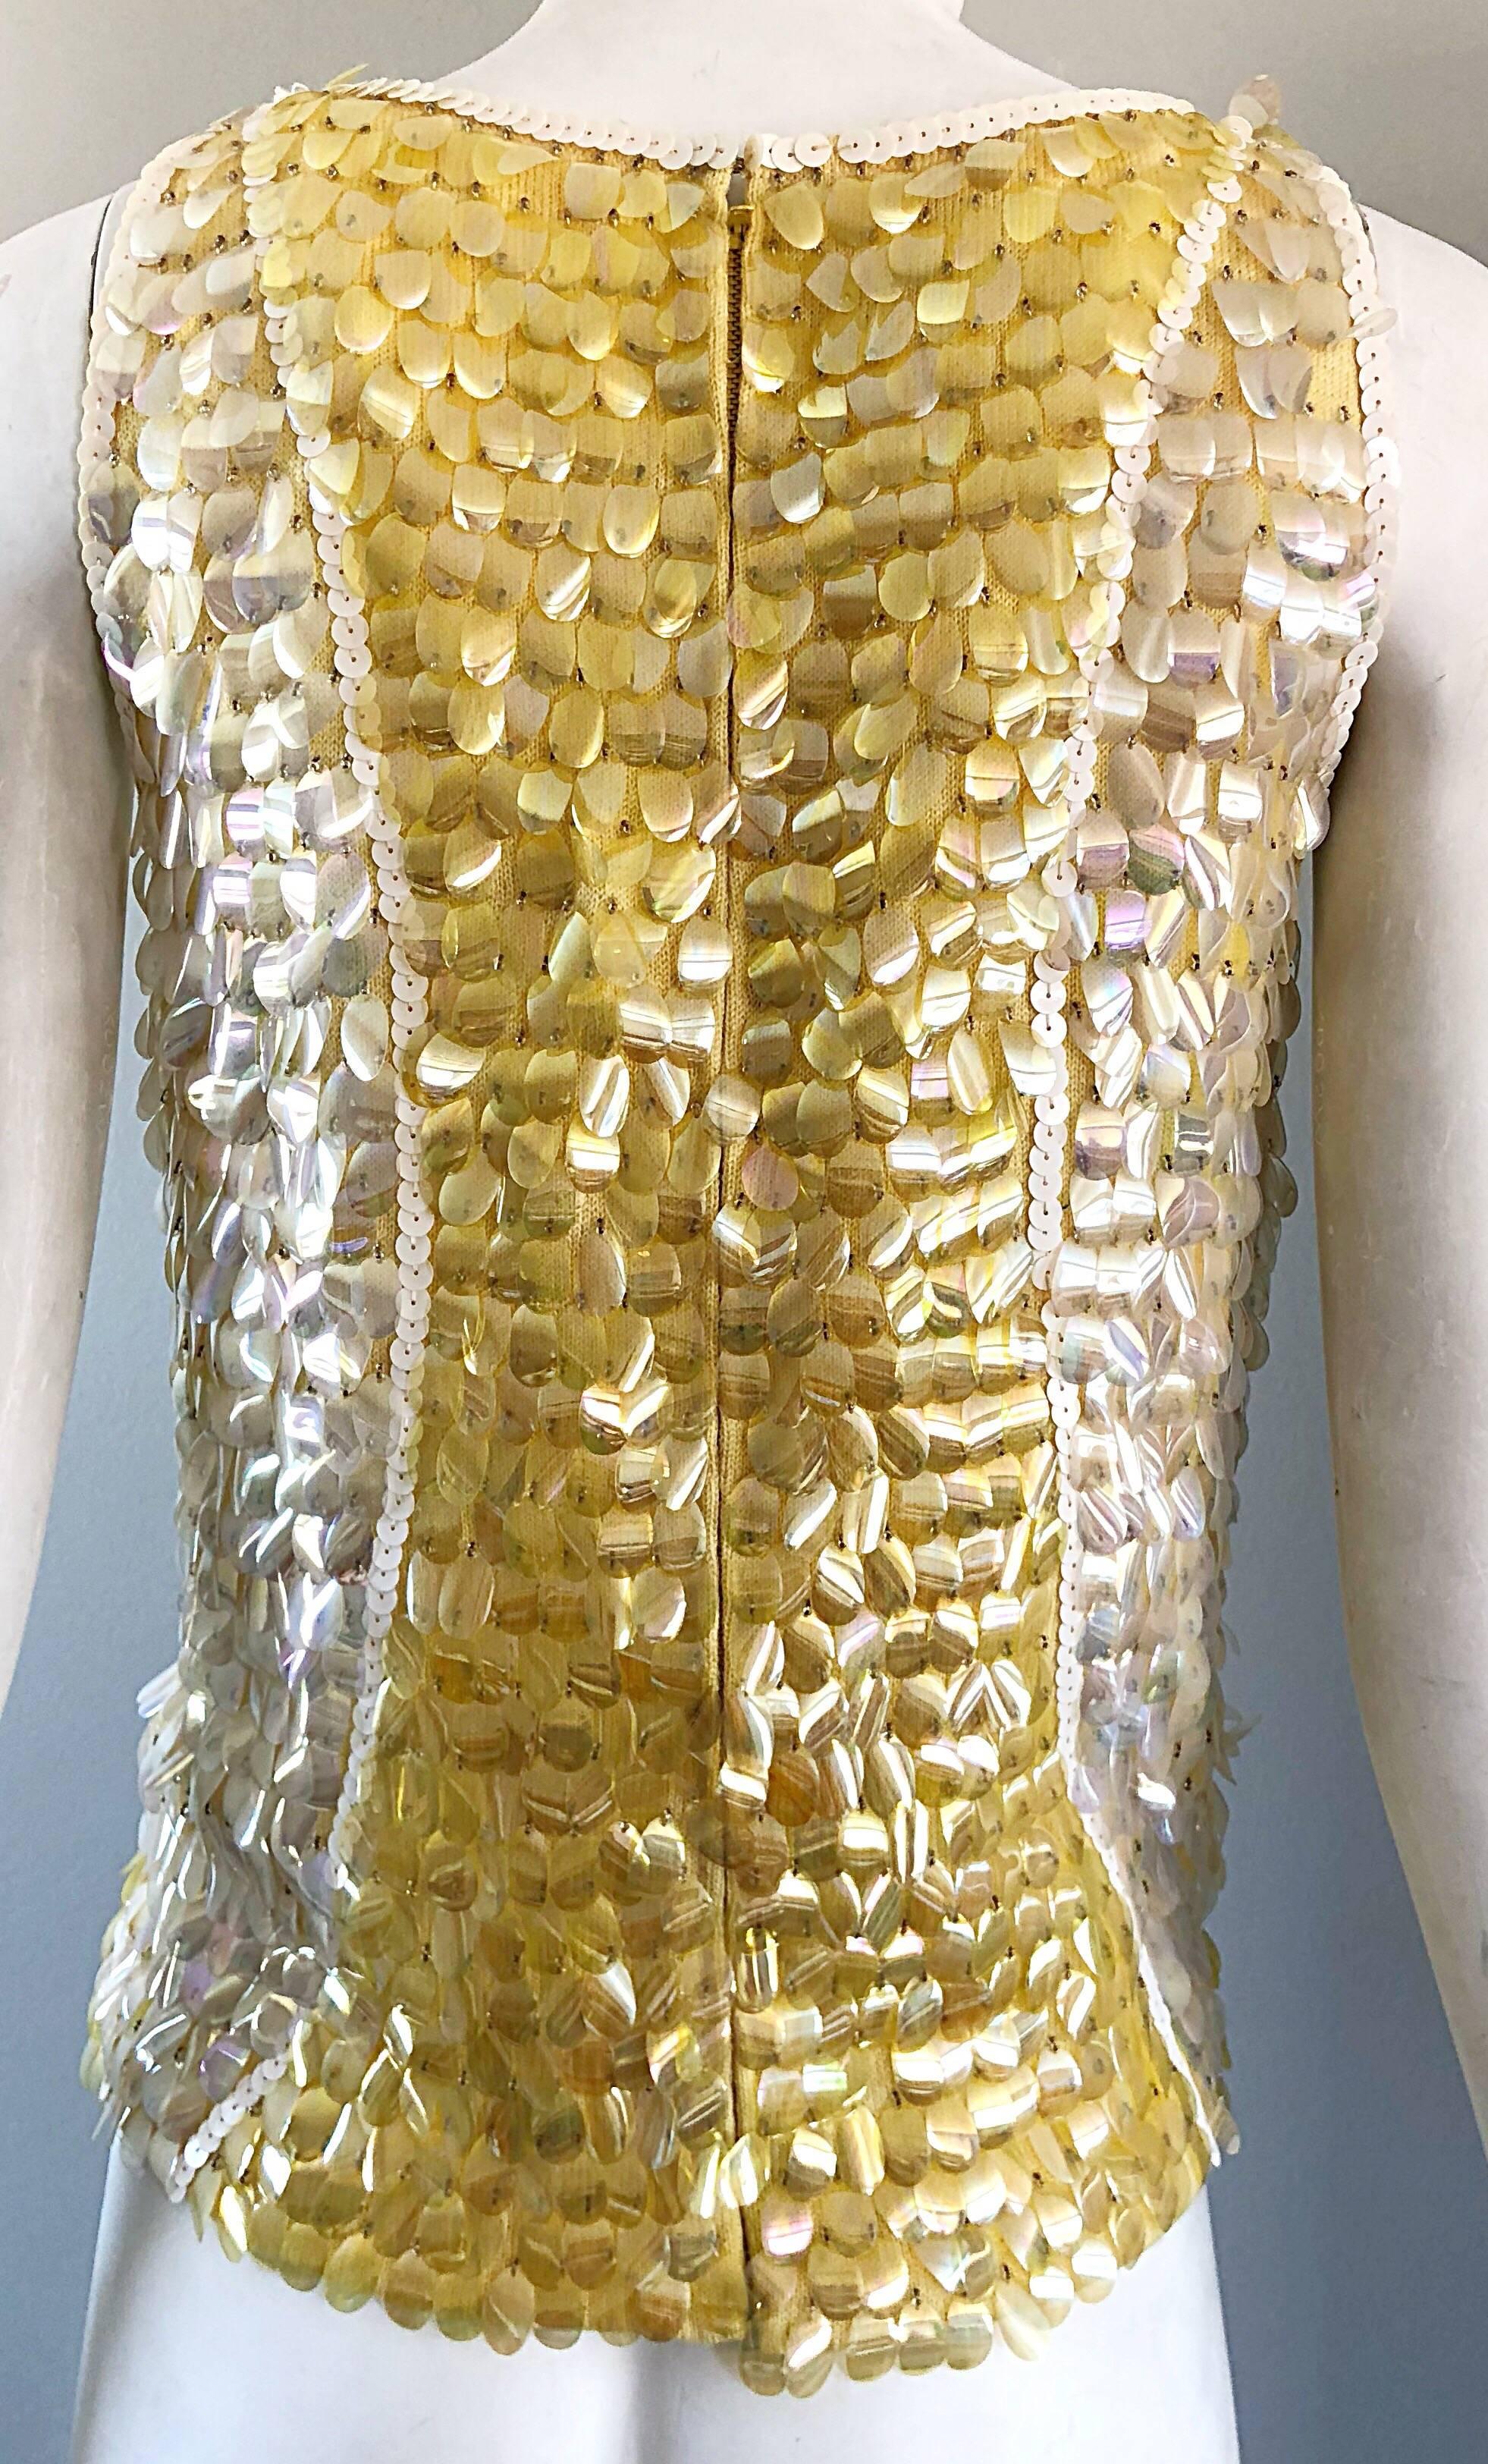 1960s Yellow + White + Clear Paillettes Sequined Lamb's Wool Sleeveless 60s Top For Sale 7